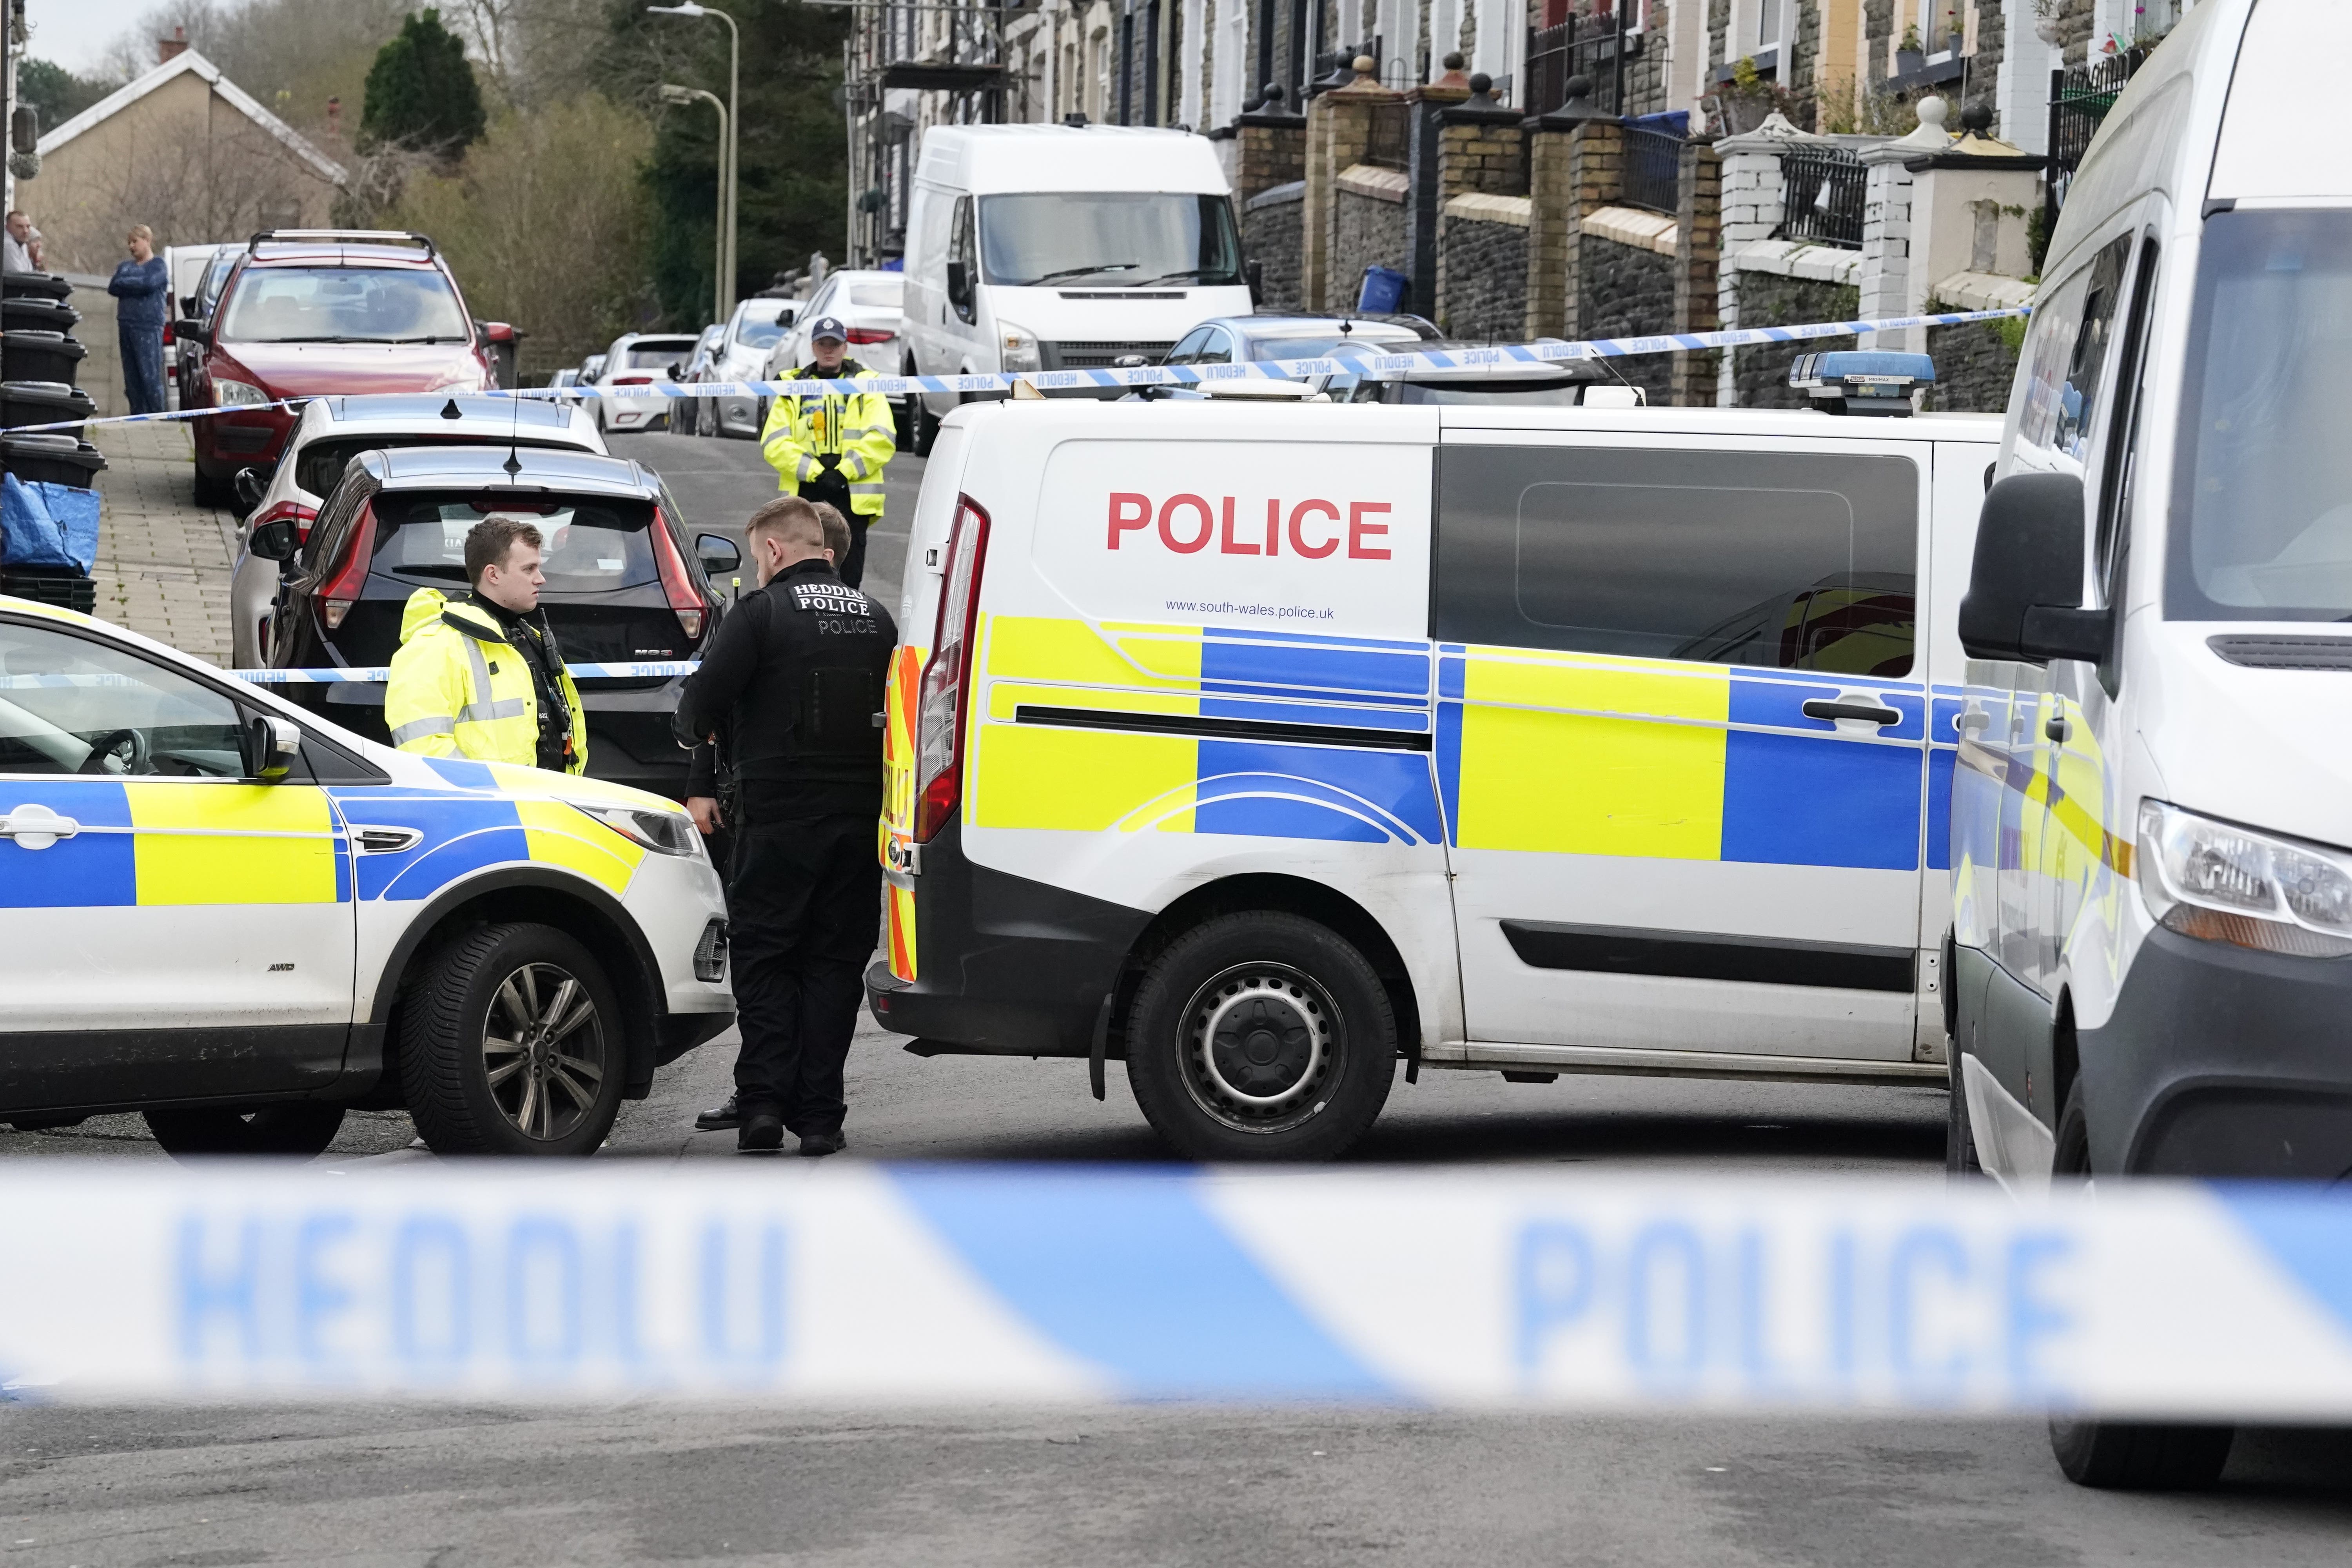 The scene on Moy Road in the village of Aberfan, Merthyr, South Wales, after a 29-year-old woman was stabbed around 9.10am on Tuesday (Andrew Matthews/PA)